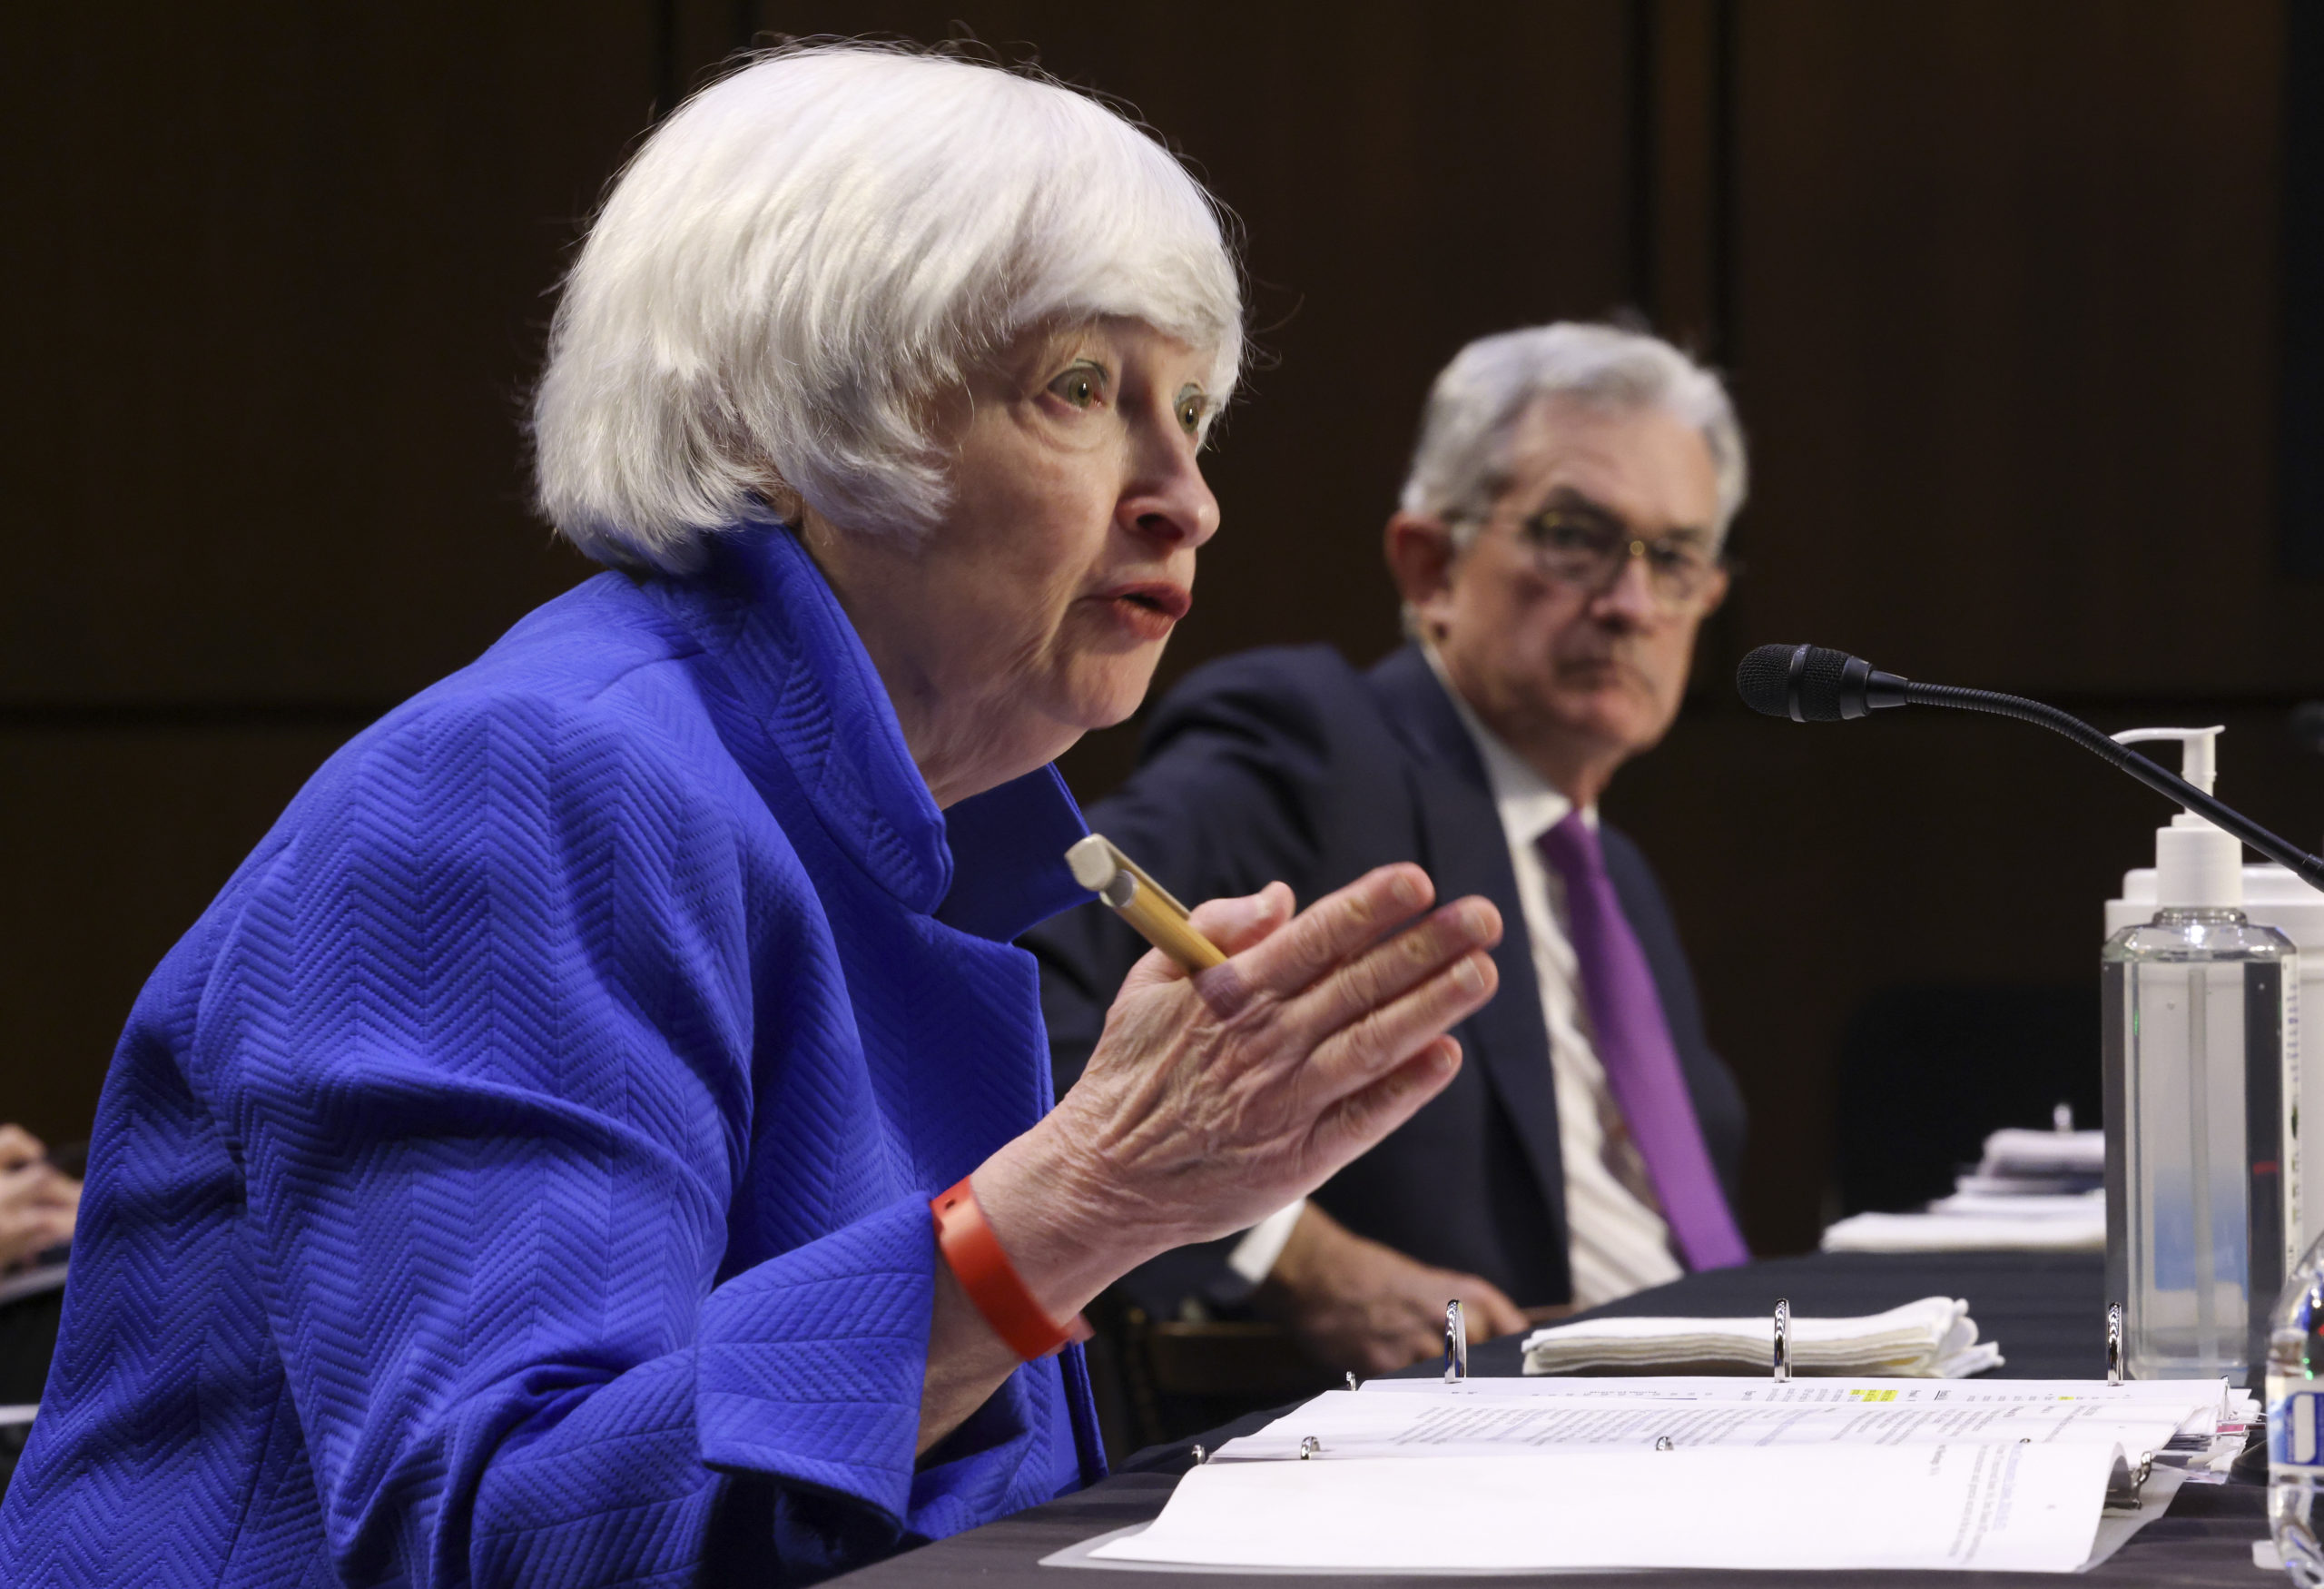 Treasury Secretary Janet Yellen and Federal Reserve Chairman Jerome Powell testify during a Senate Banking Committee hearing on the economy Monday. (Kevin Dietsch/Getty Images)